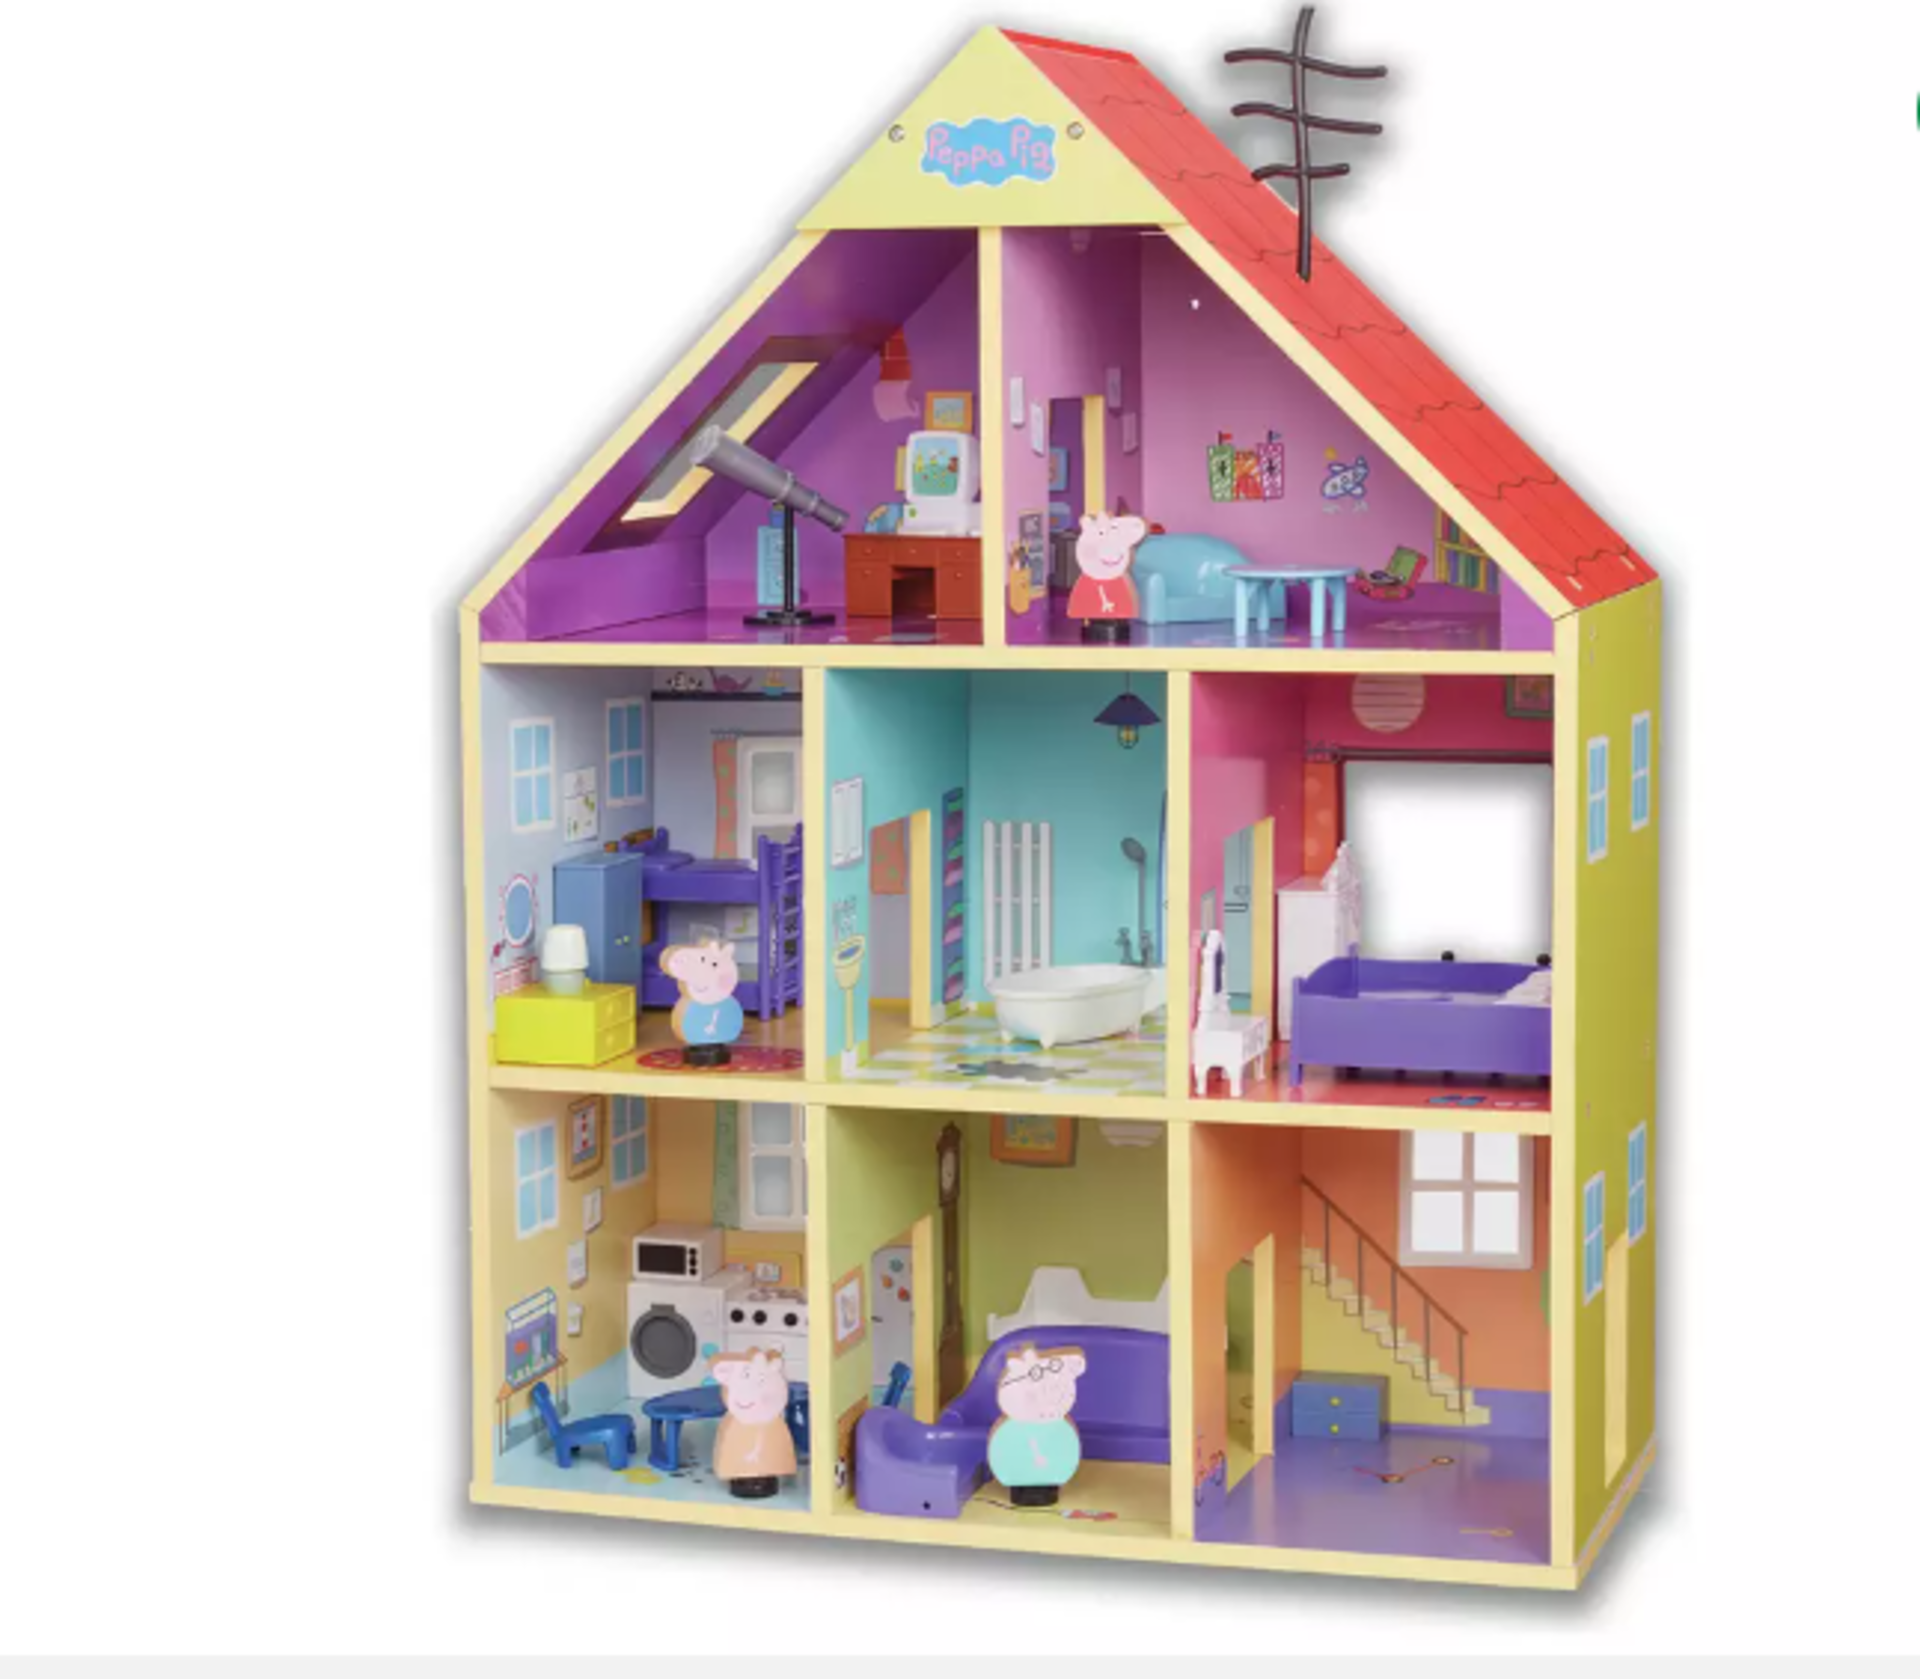 Peppa Pig Wooden Playhouse. - ER22. Bring the world of Peppa Pig to life at home with this beautiful